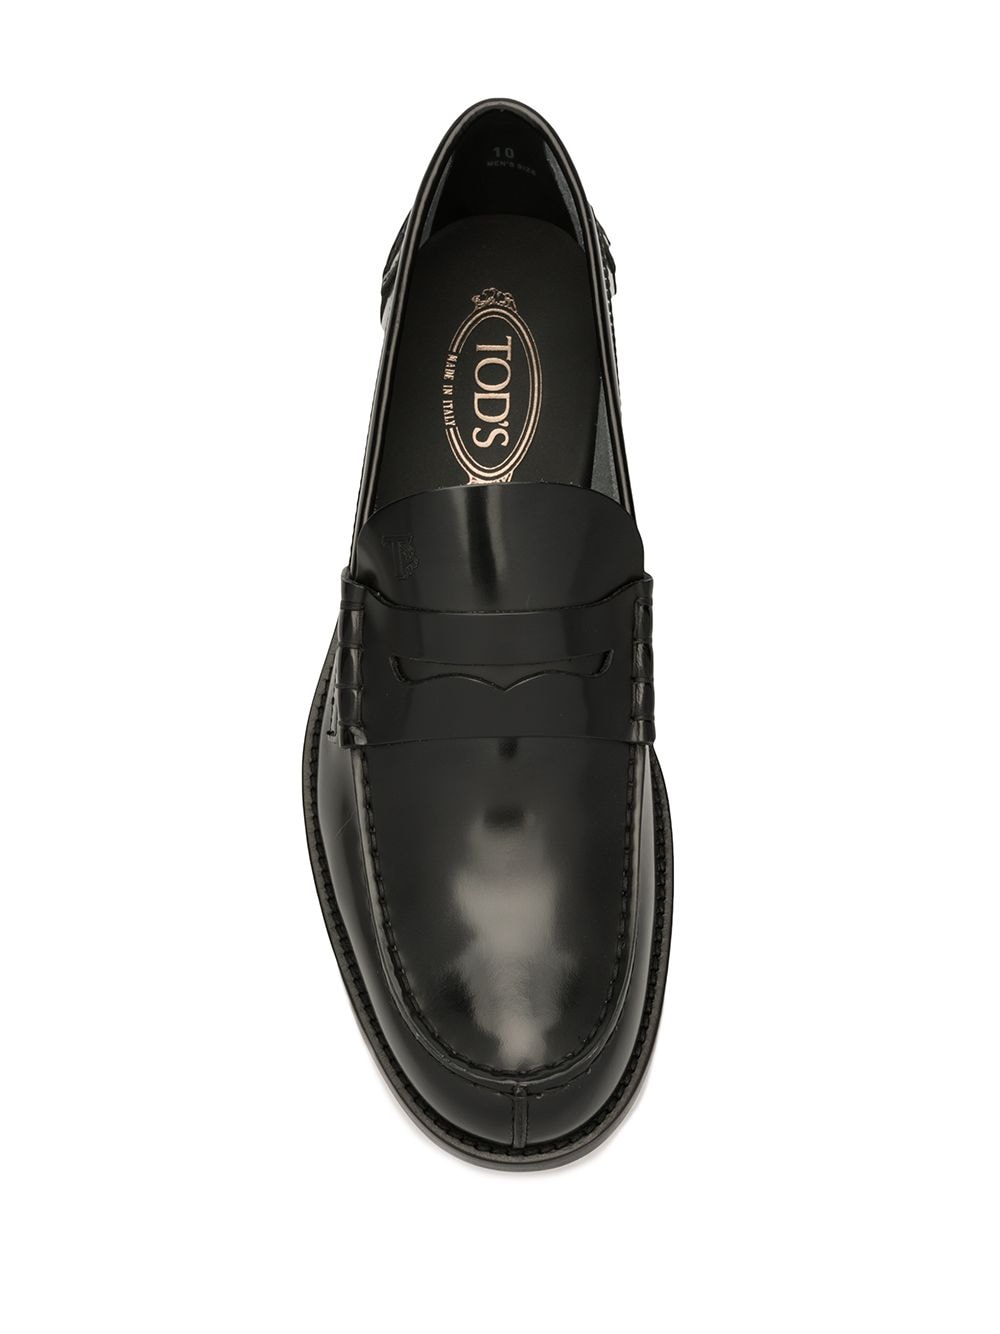 TOD'S Black Leather Loafers for Men